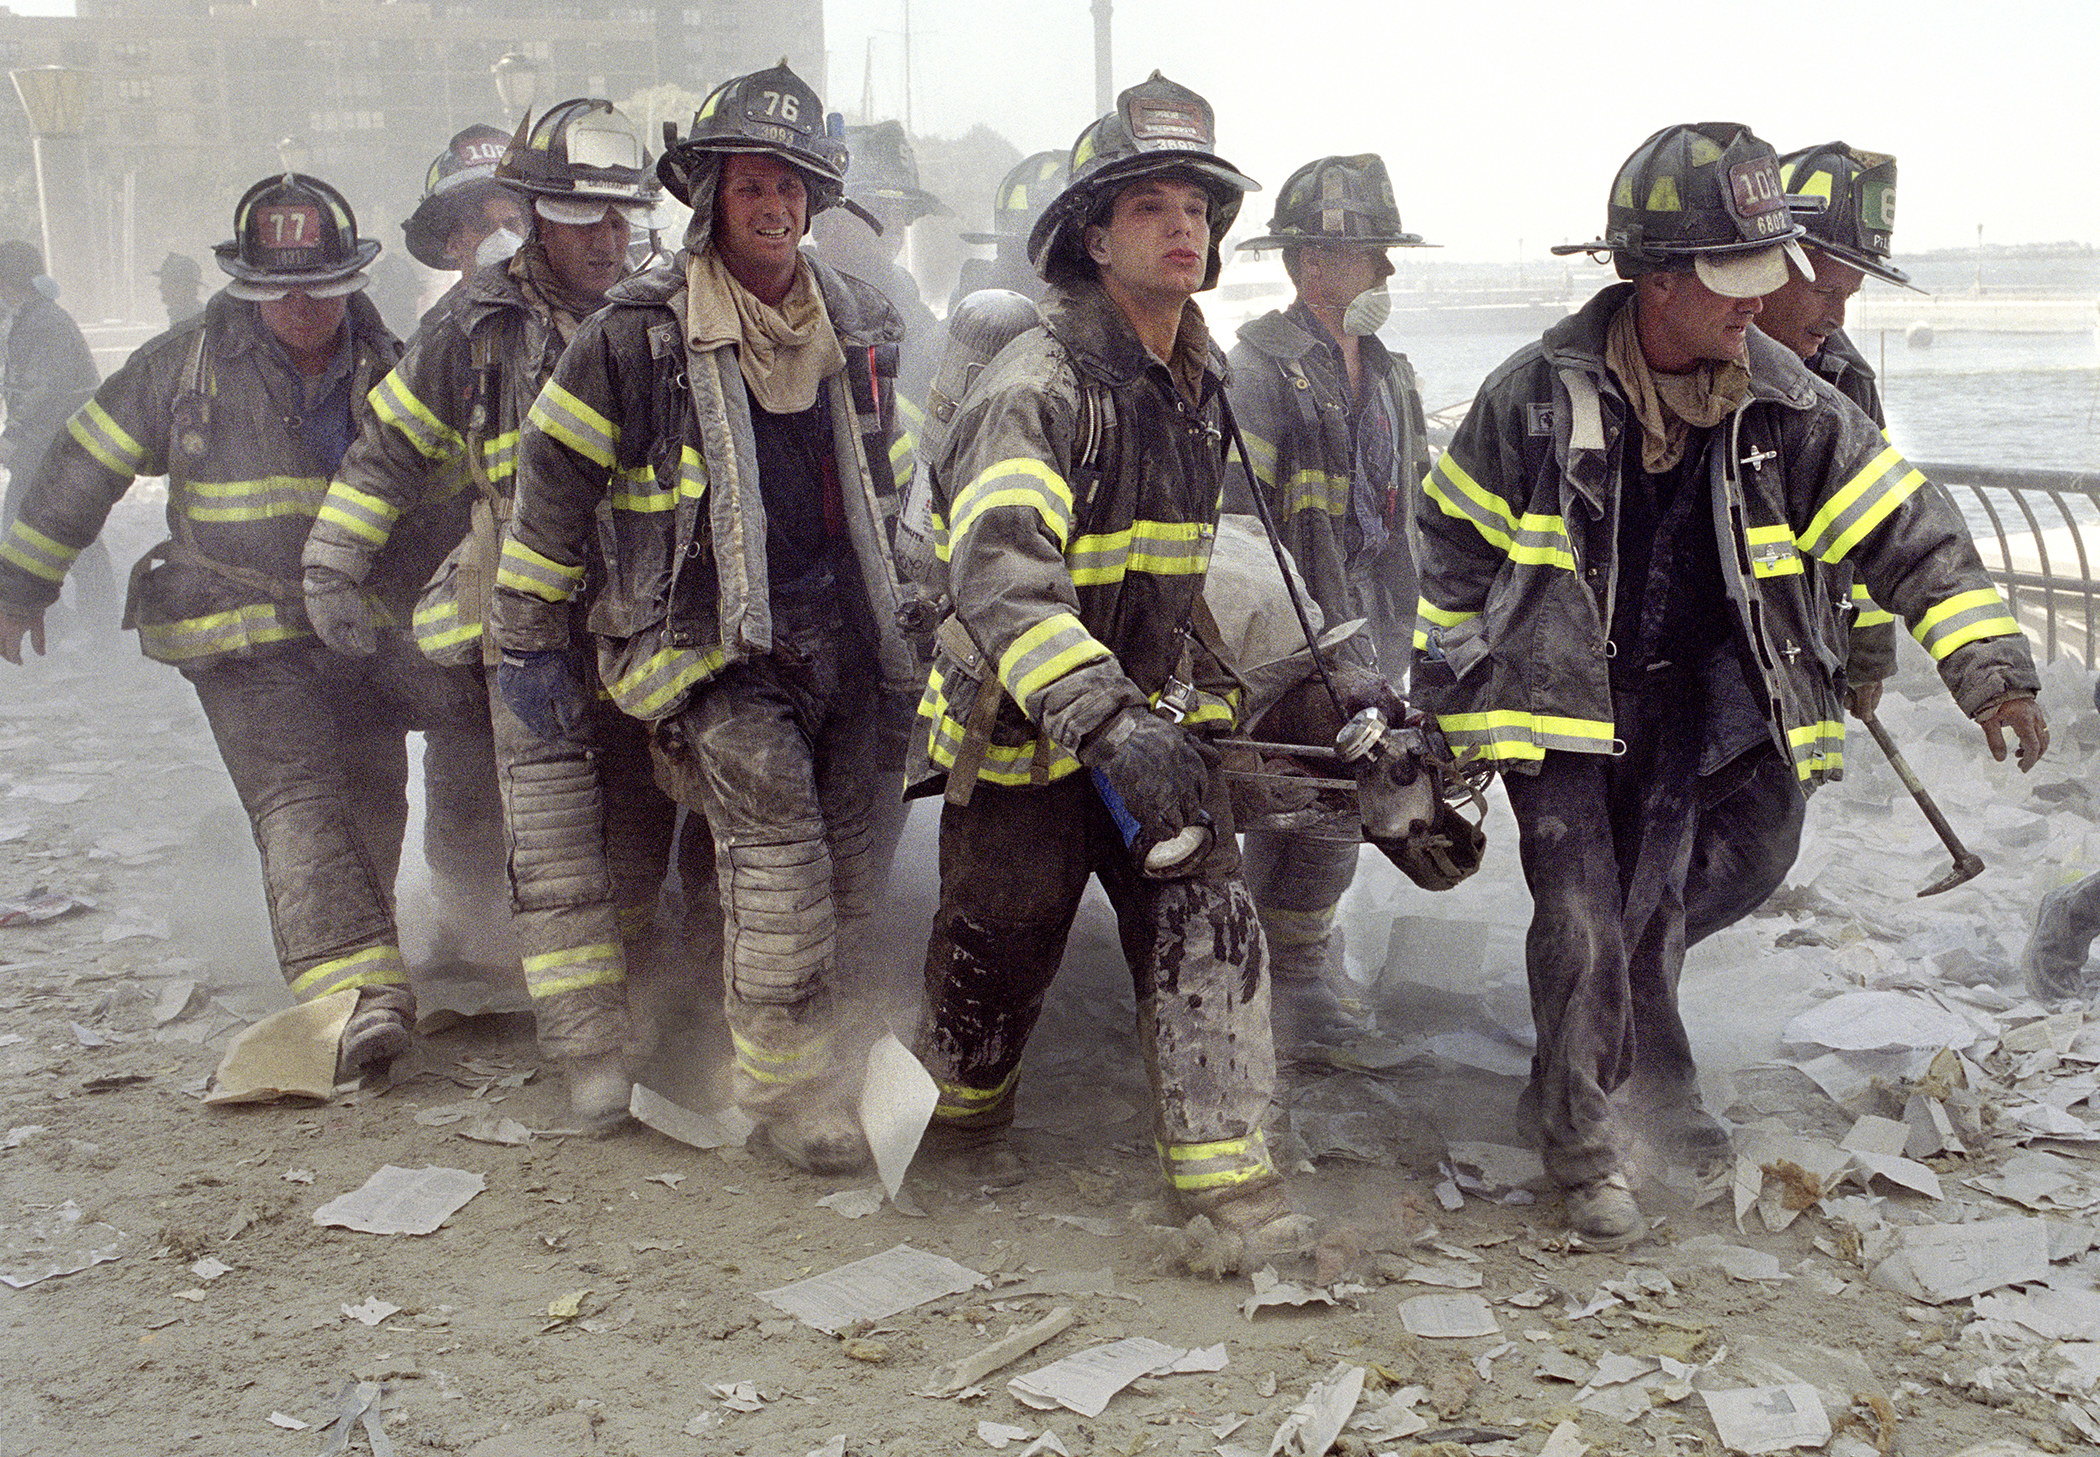 These Powerful Photo Capture The Bravery And Selflessness Of 9 11 First Responders